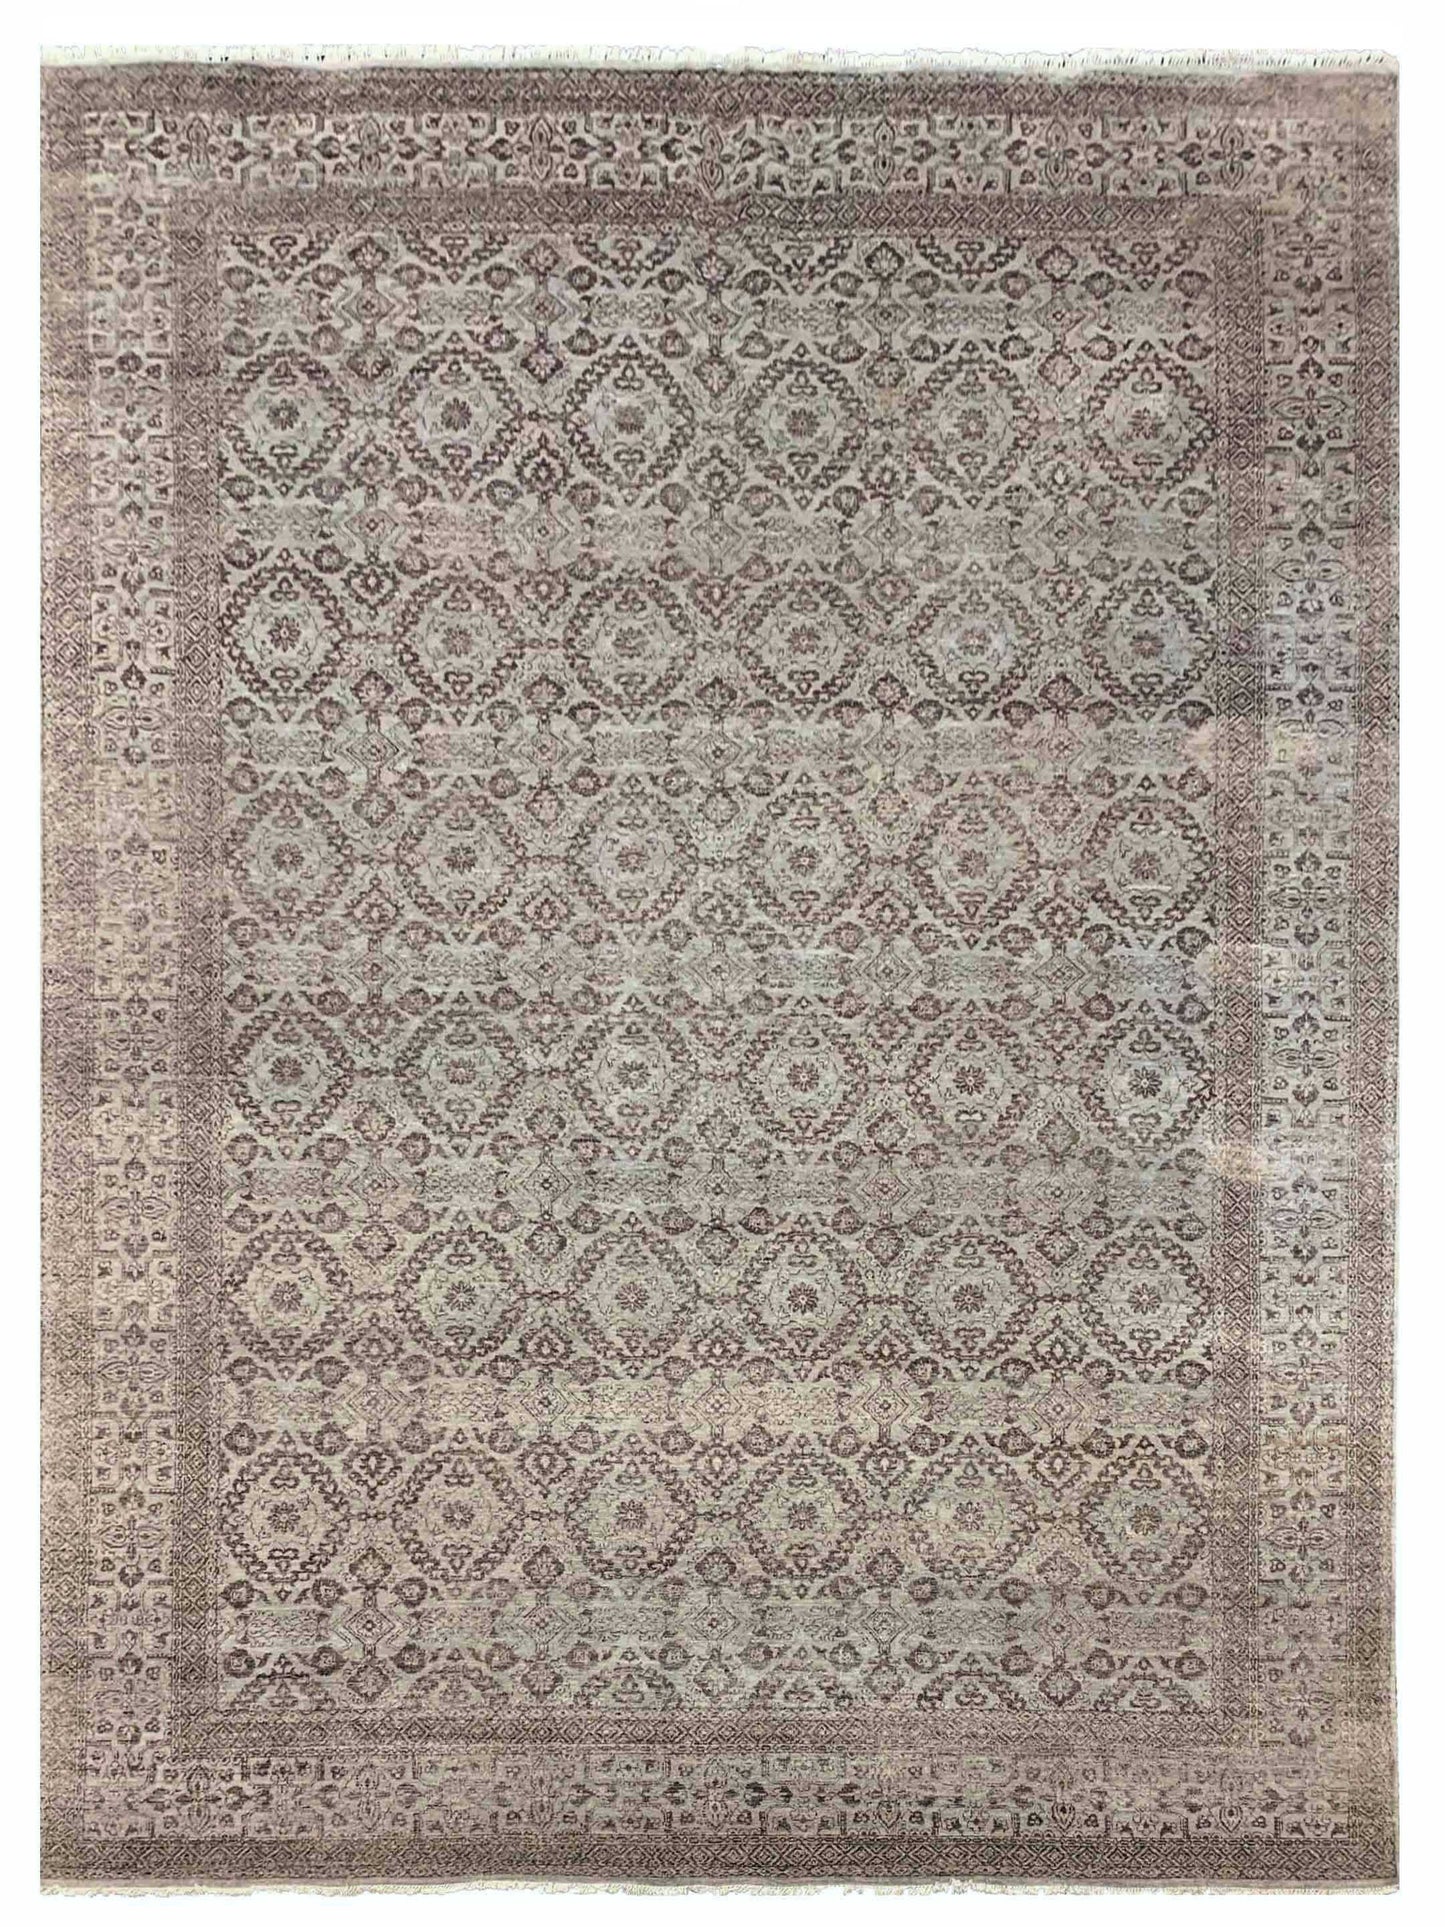 Artisan Victoria AM-051 Silver Modern Knotted Rug